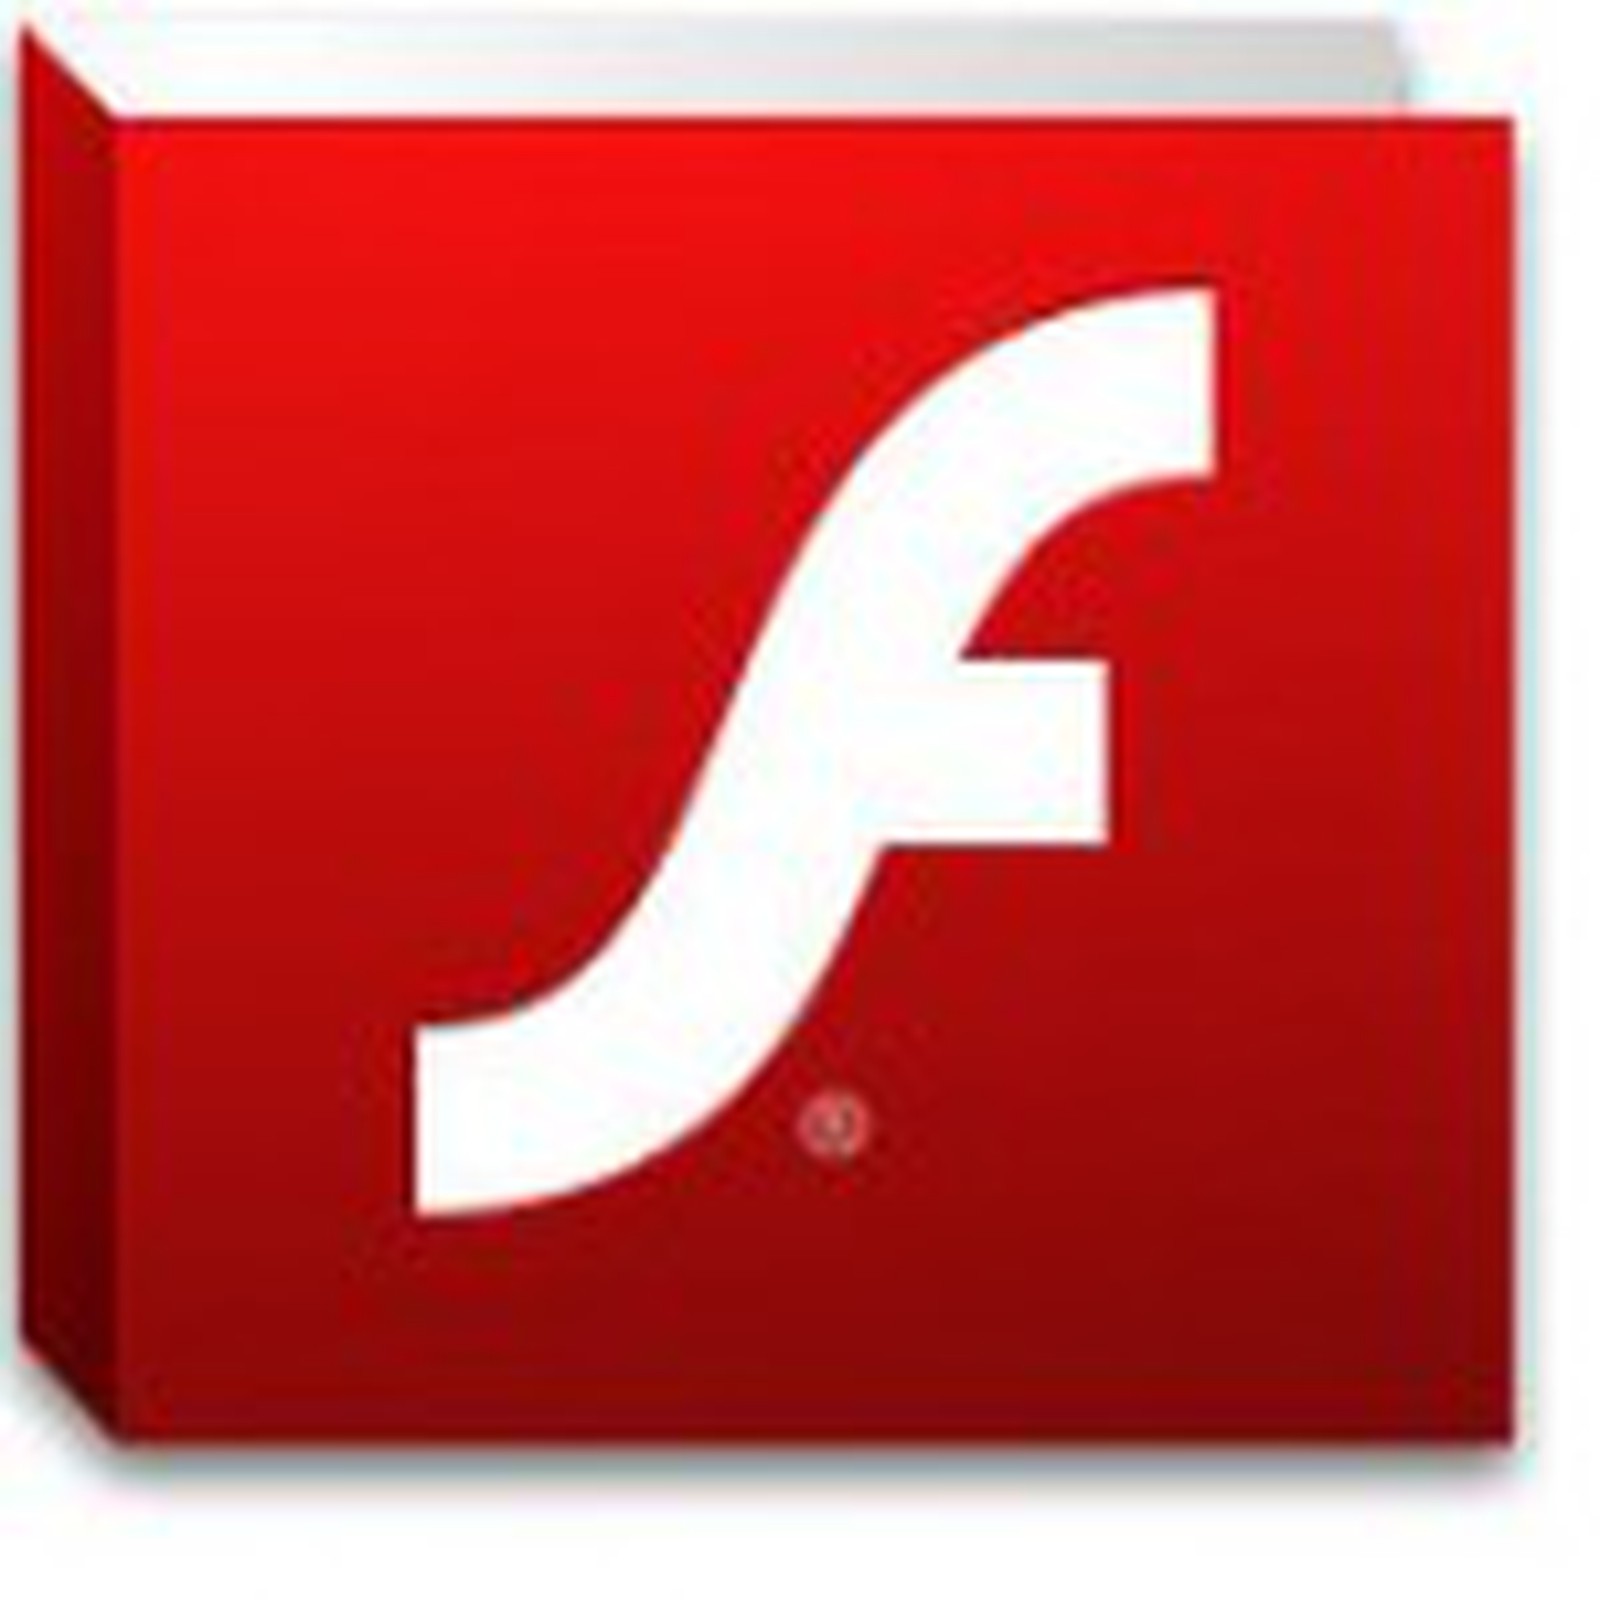 how to get adobe flash on macbook air